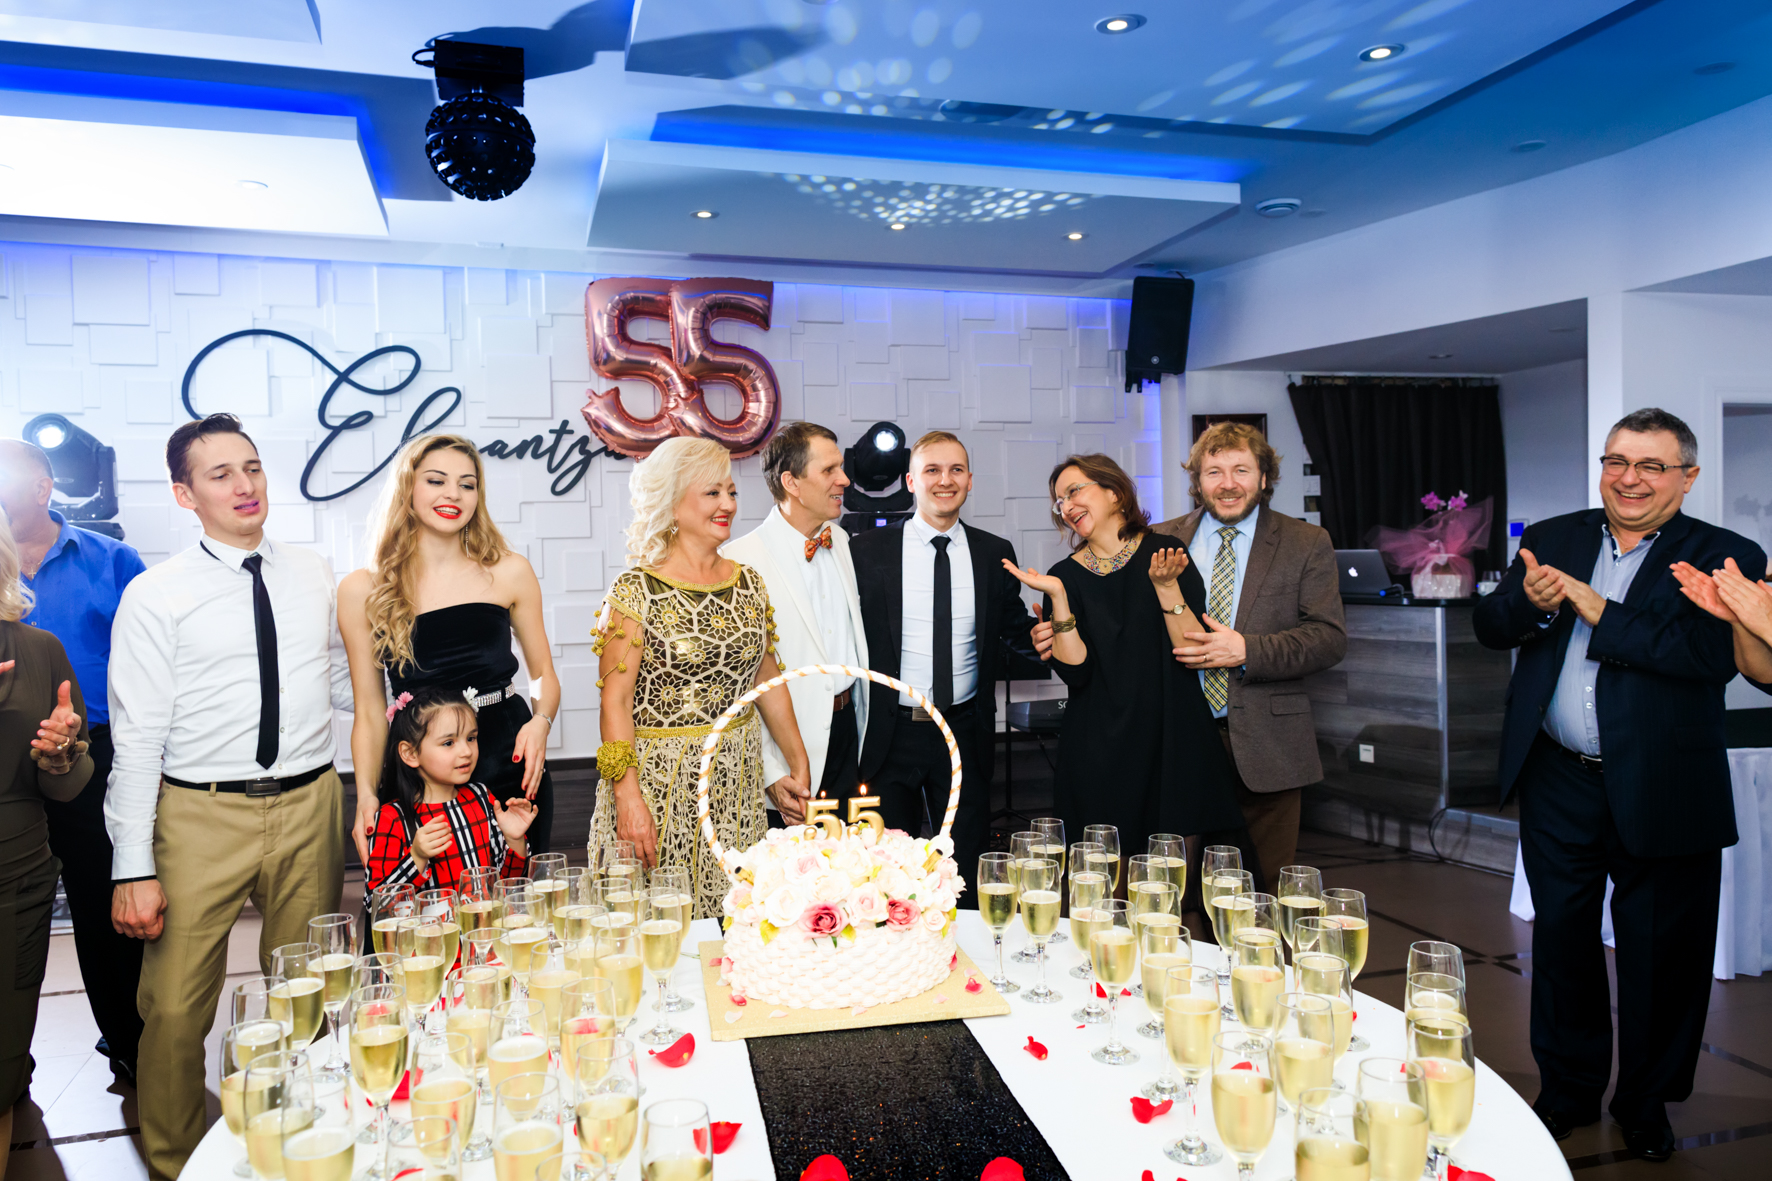 Anniversaires with best photographers and professional videographers team – VIO IMAGE